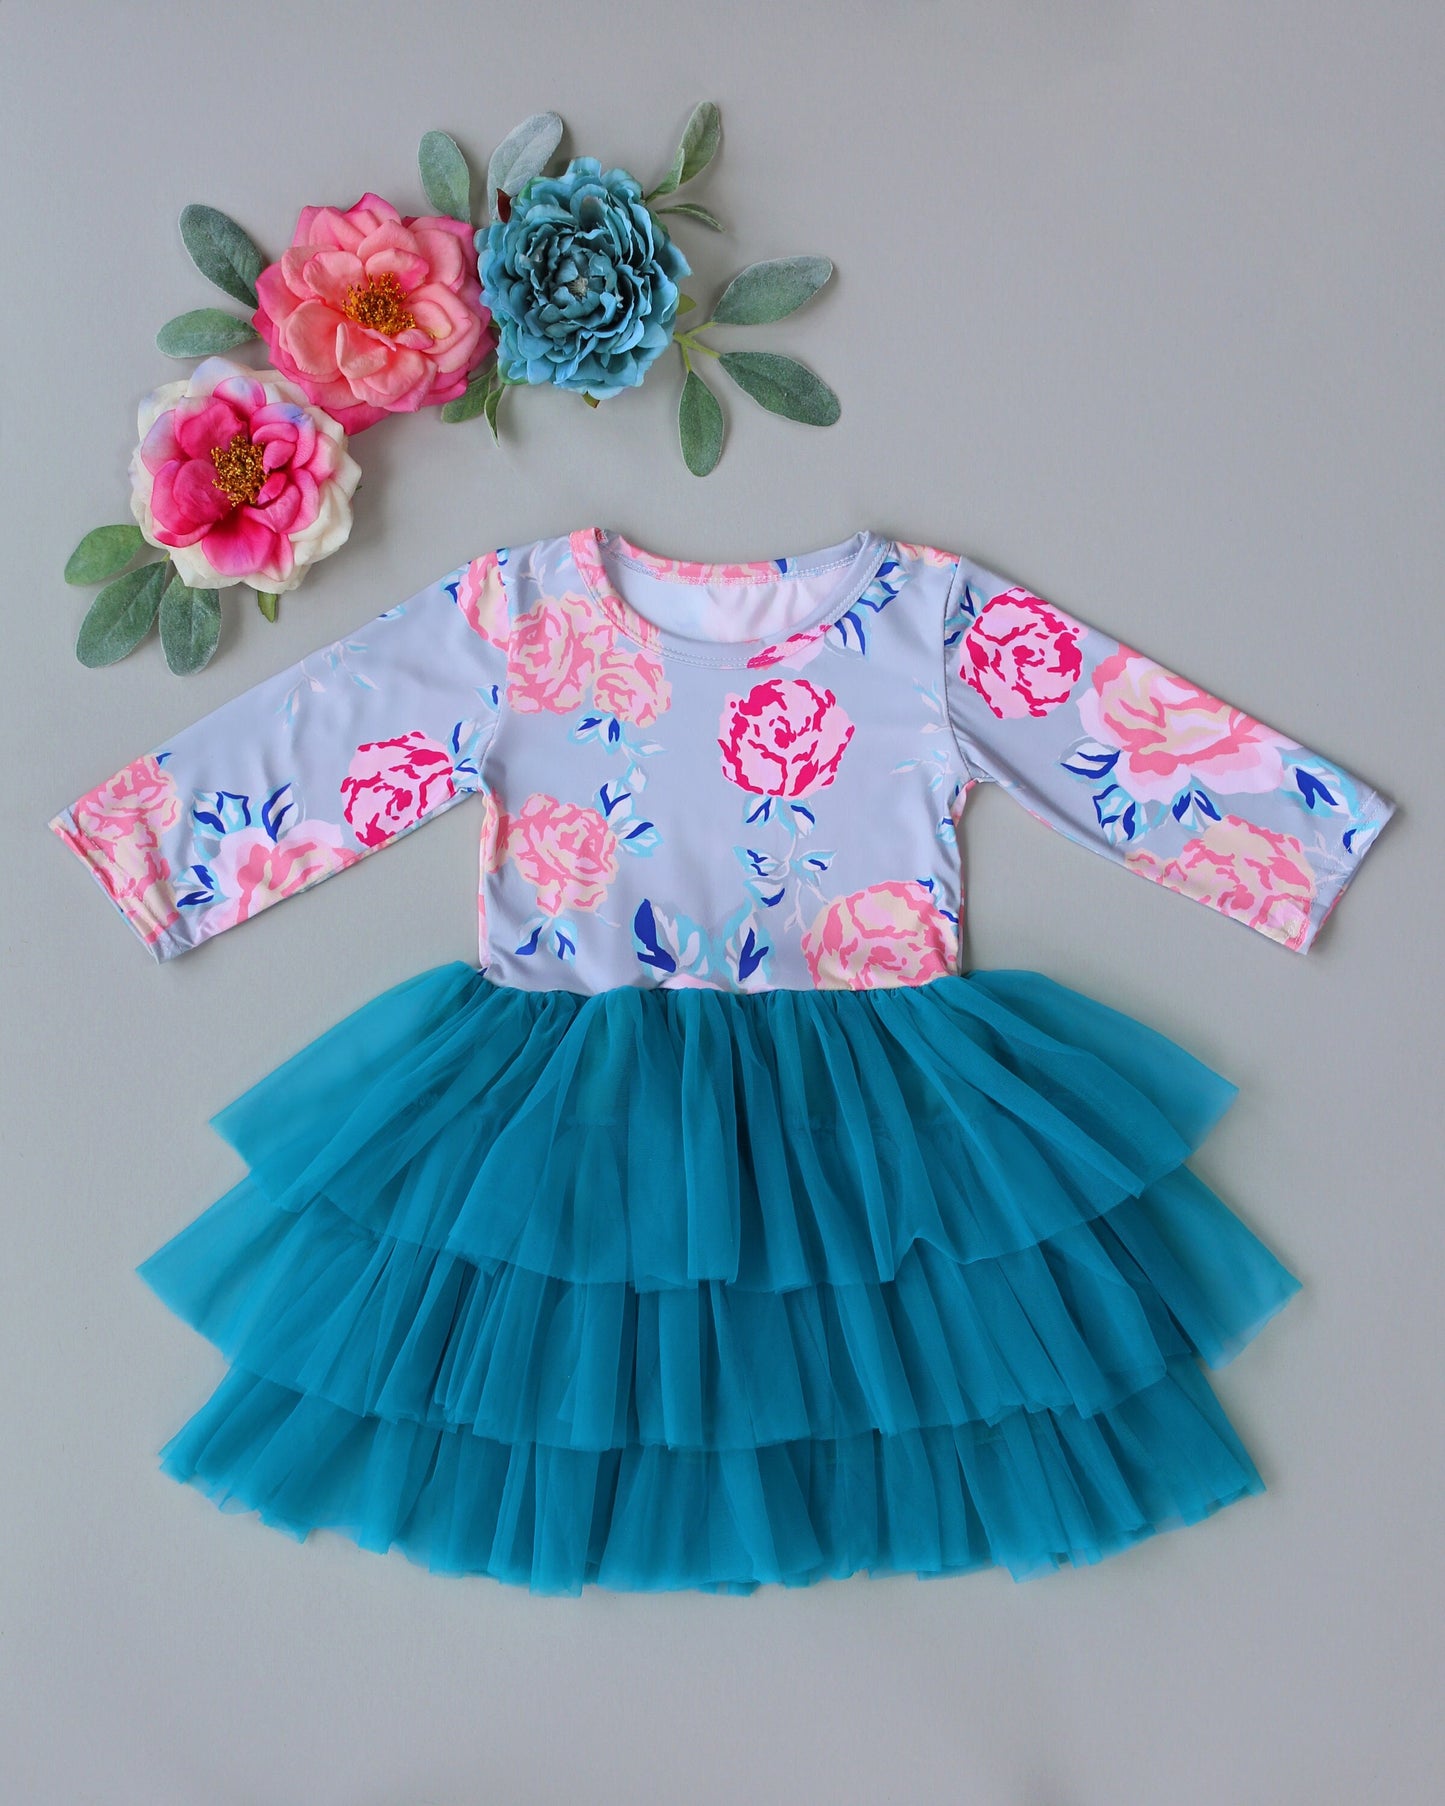 3/4 Sleeve Tutu Dress in Gray, Teal and Pink Pop Roses